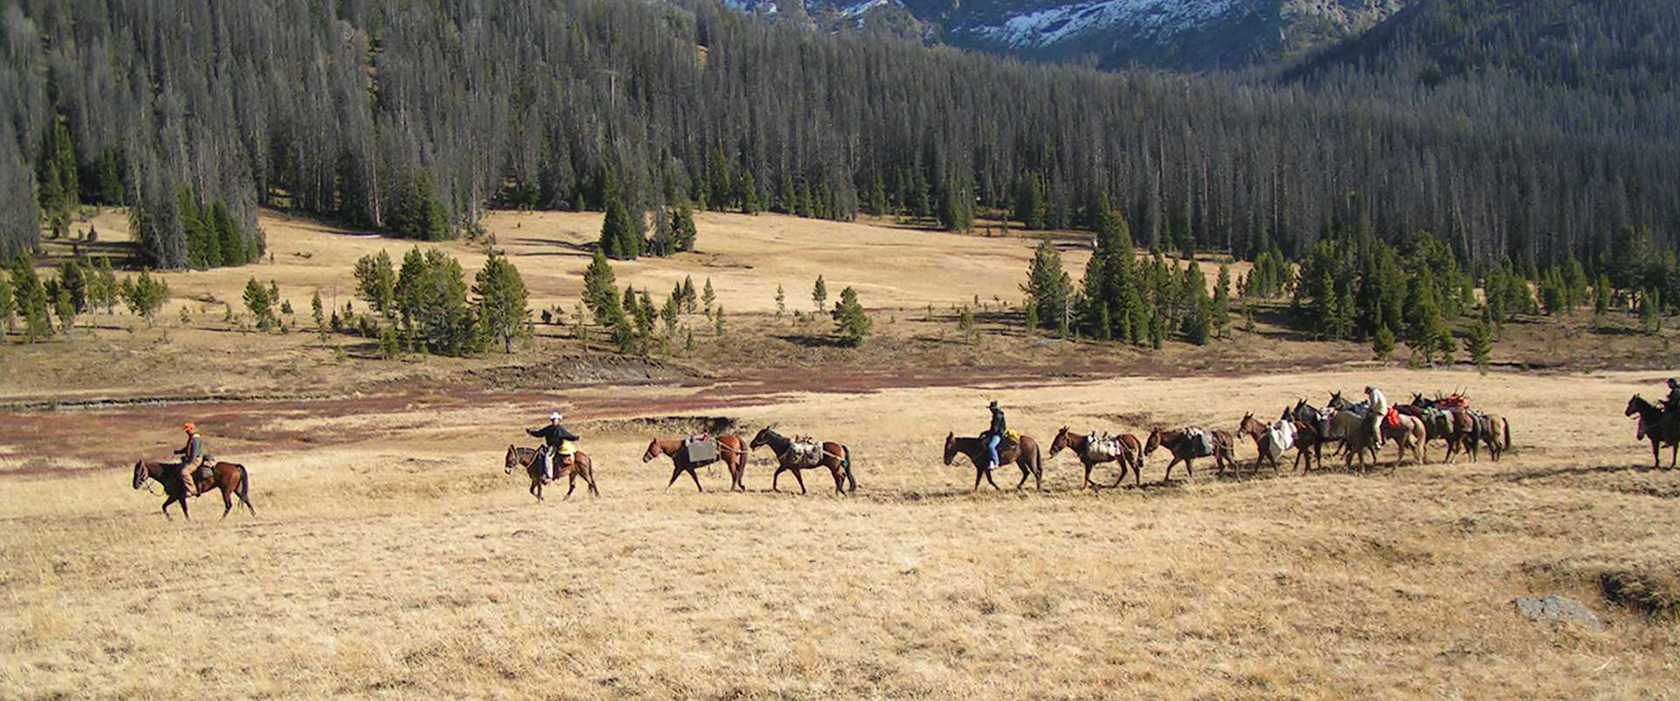 ranch real estate, ott WY/ranch real estate for sale in ott WY